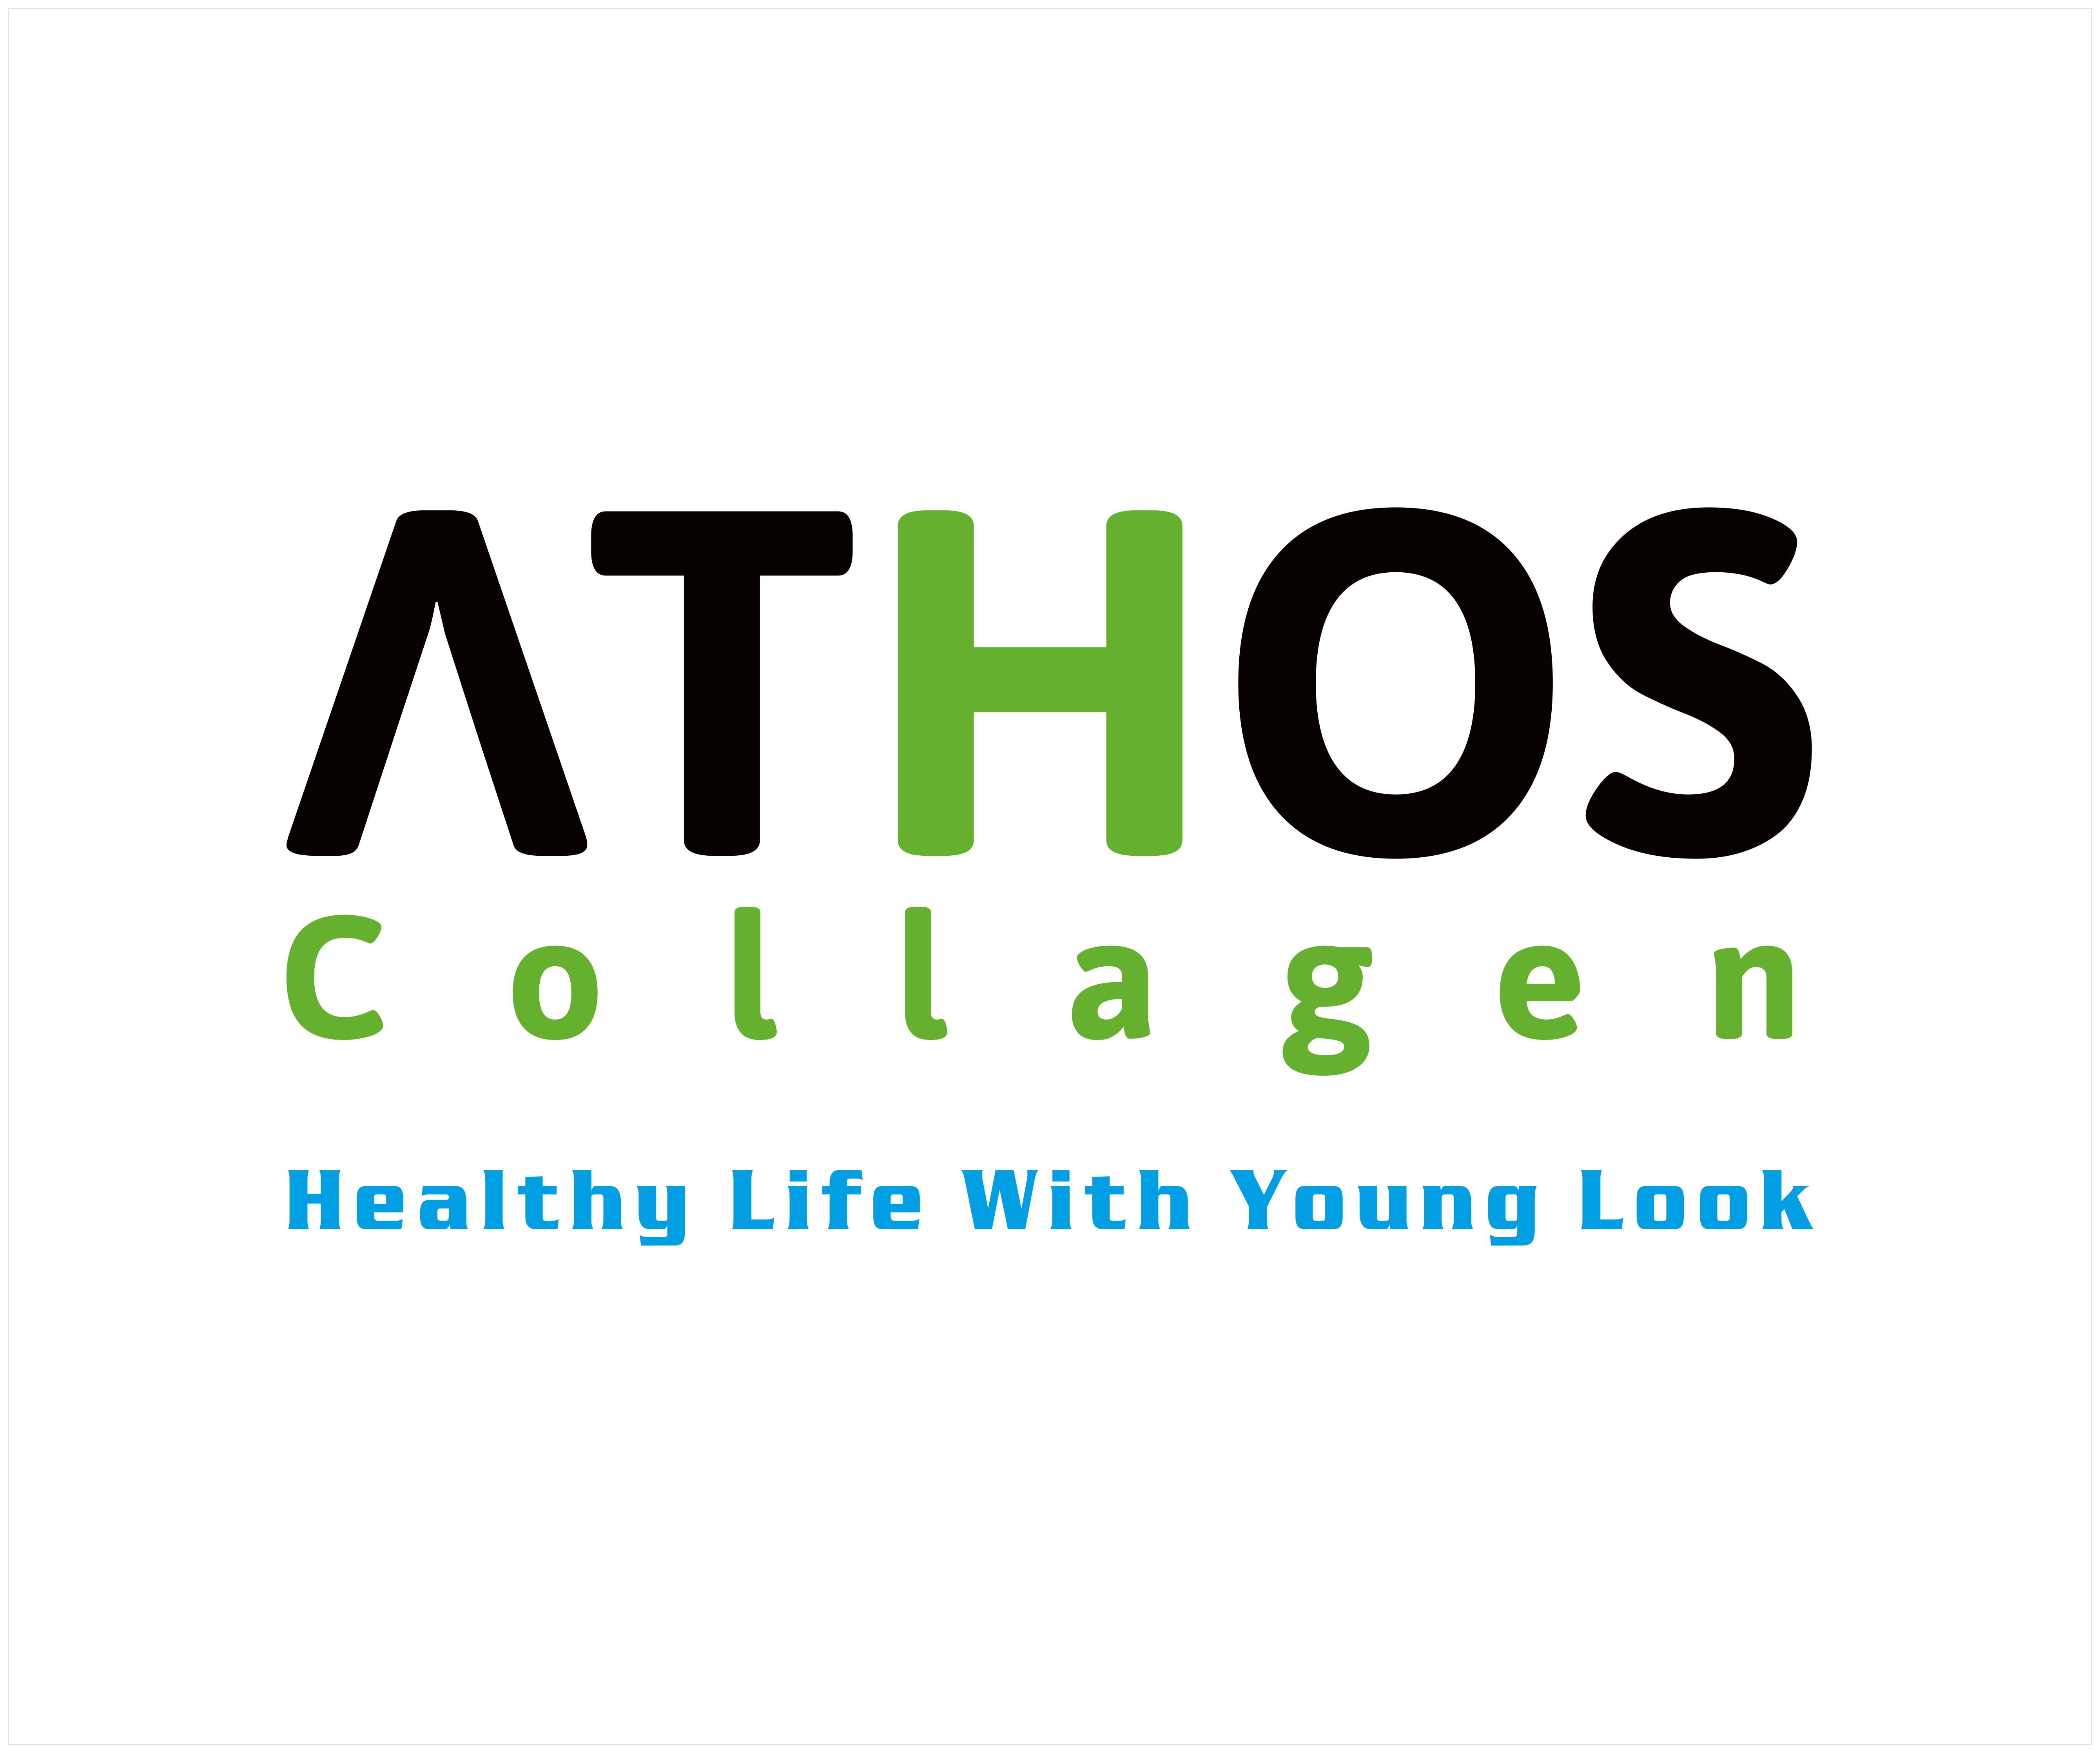 Athos Collagen Private Limited